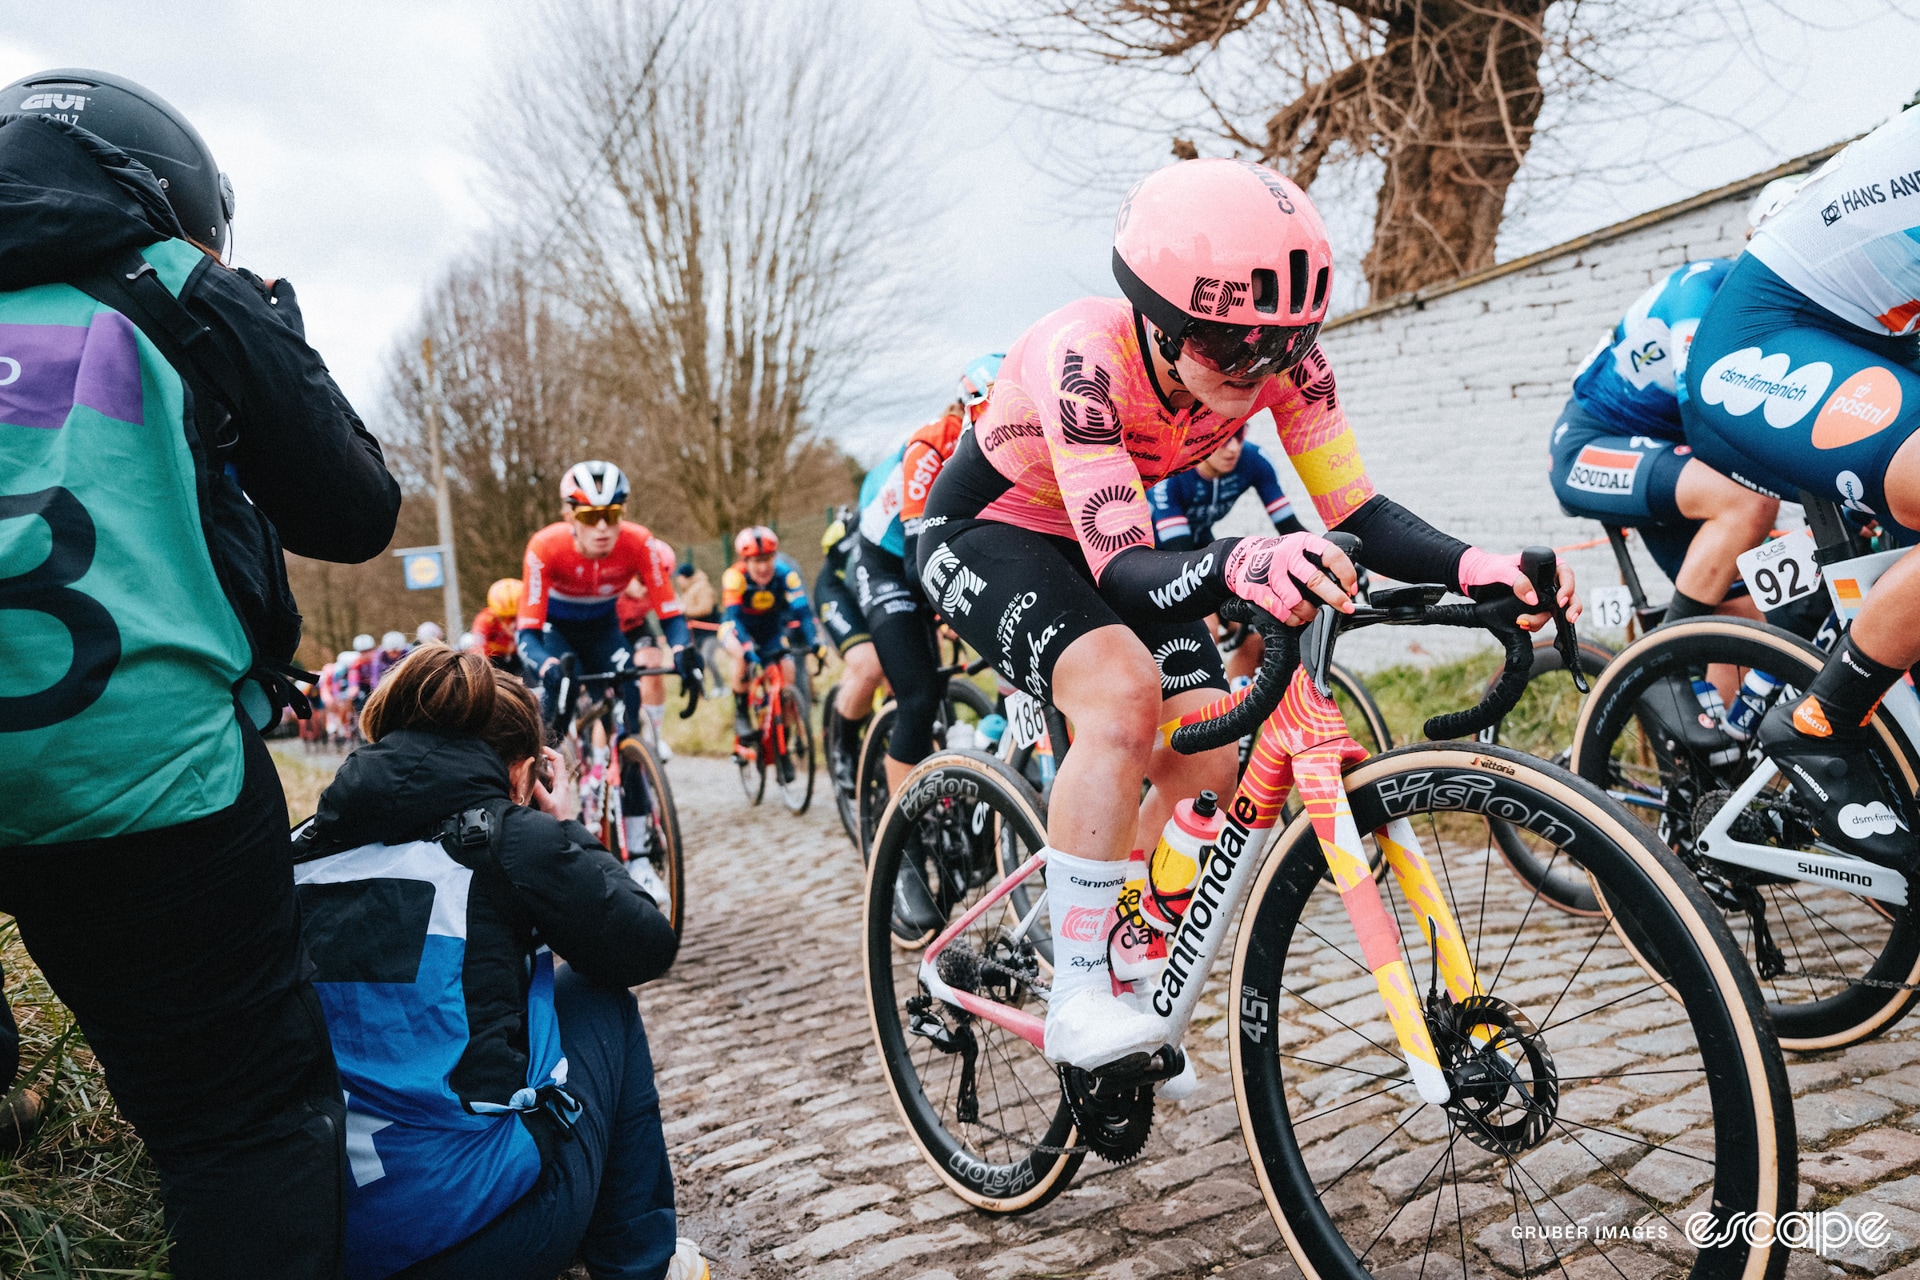 An EF rider on the cobbles.